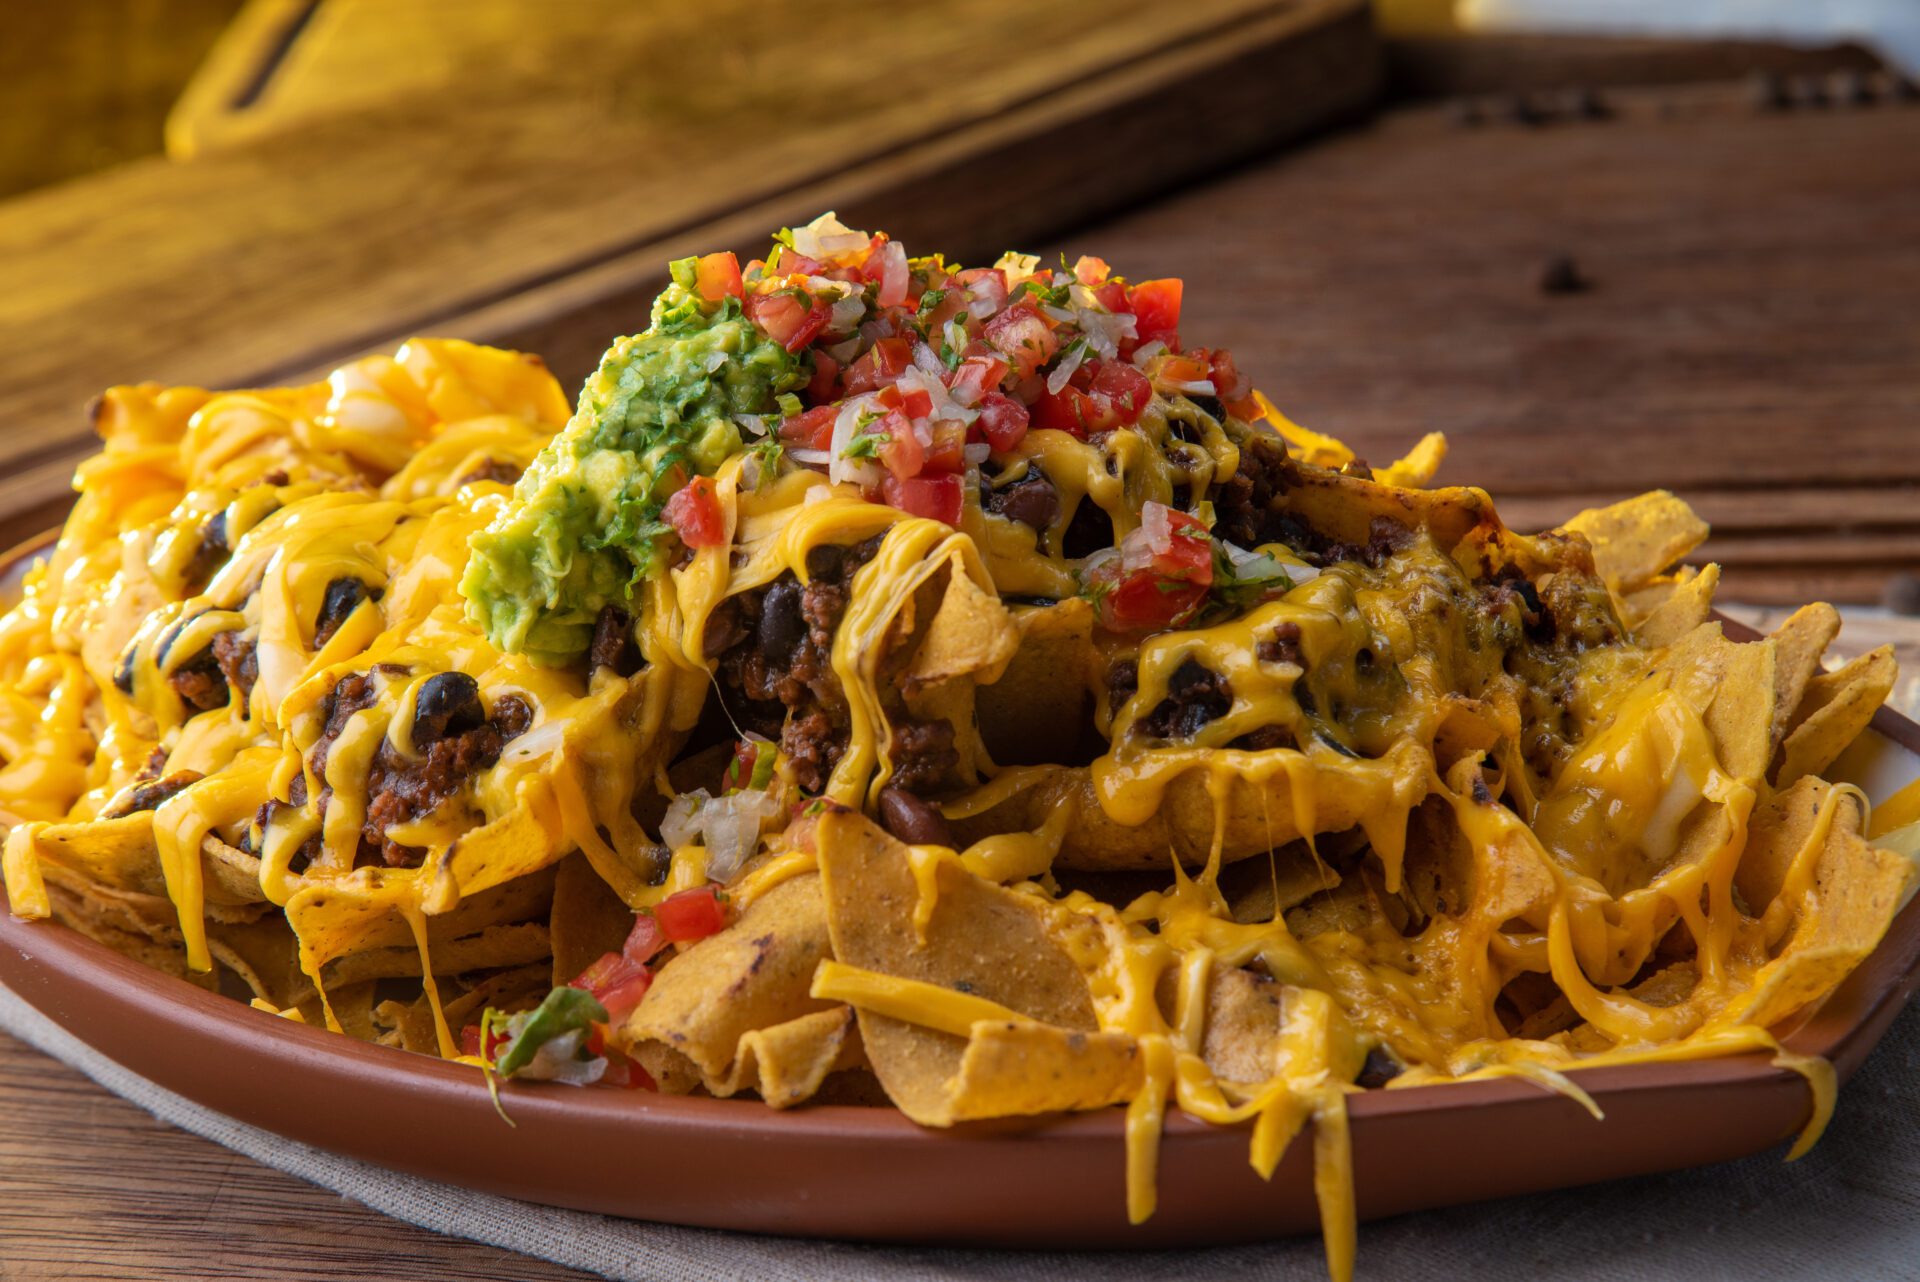 A plate of nachos with cheese, guacamole and tomatoes.